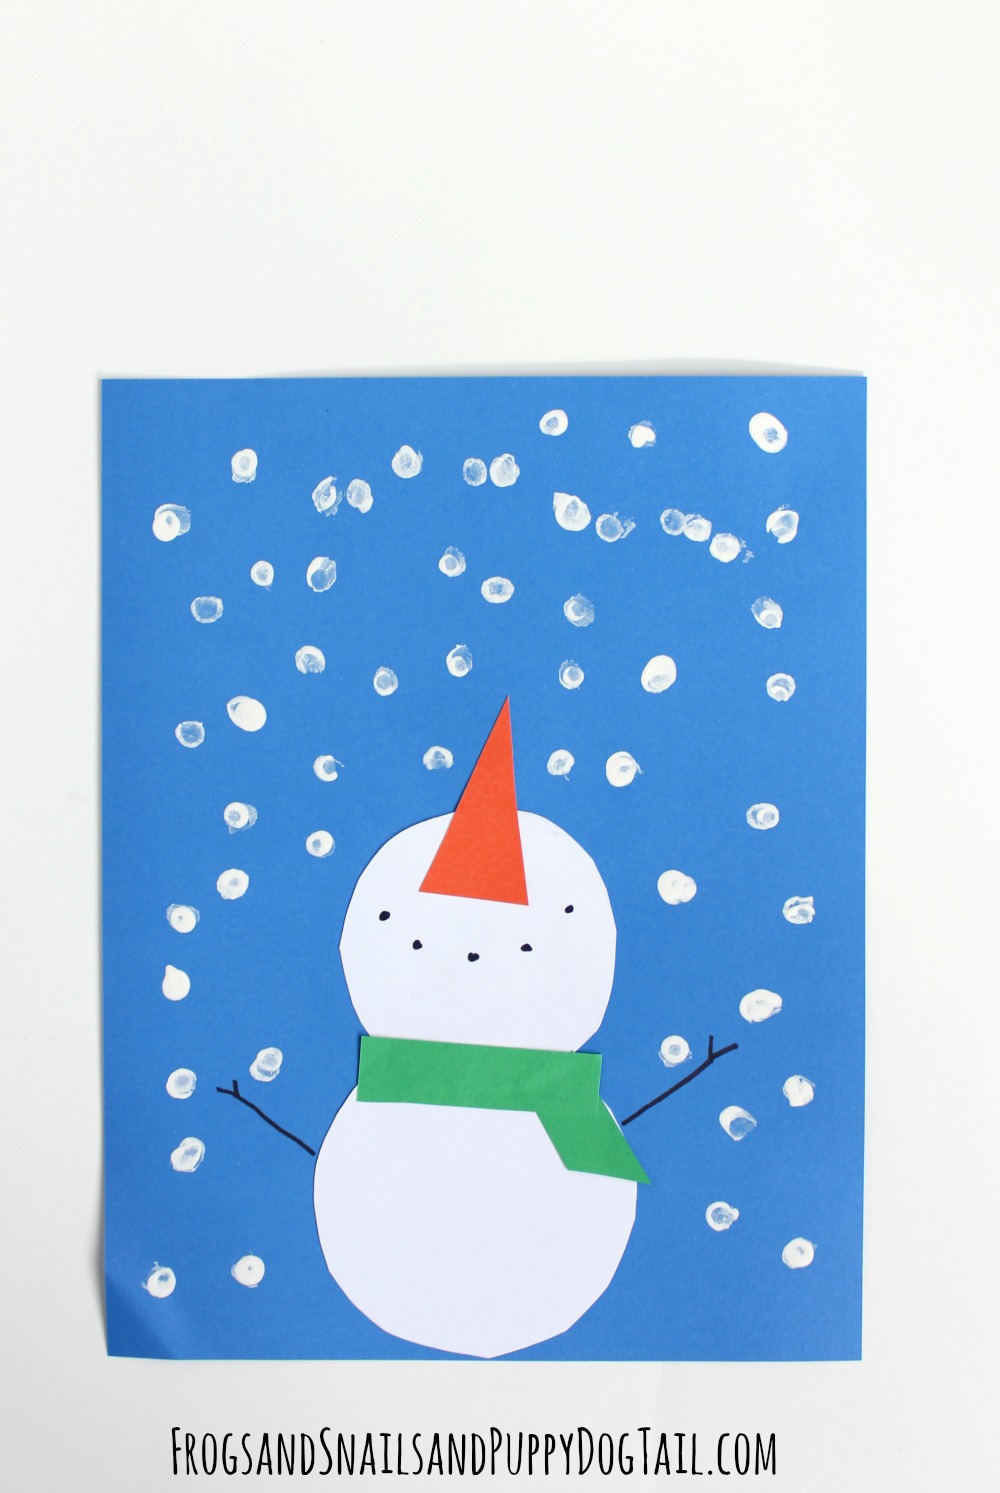 Easy Cotton Ball Snowman Craft for Kids